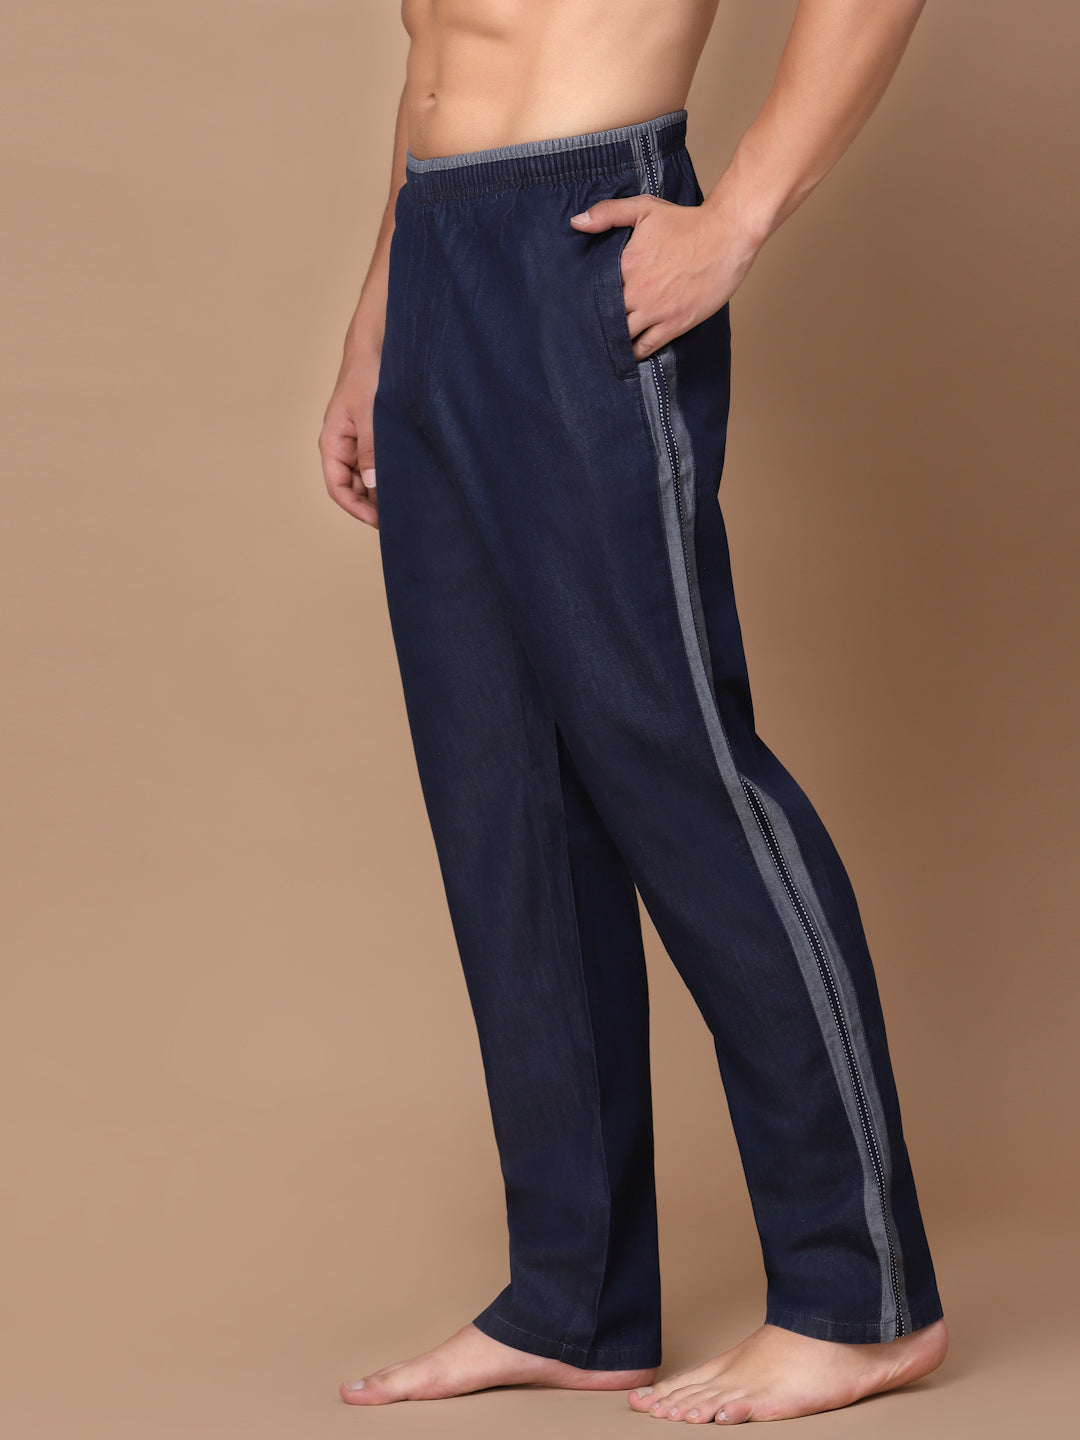 RELAXED FIT COTTON PYJAMAS